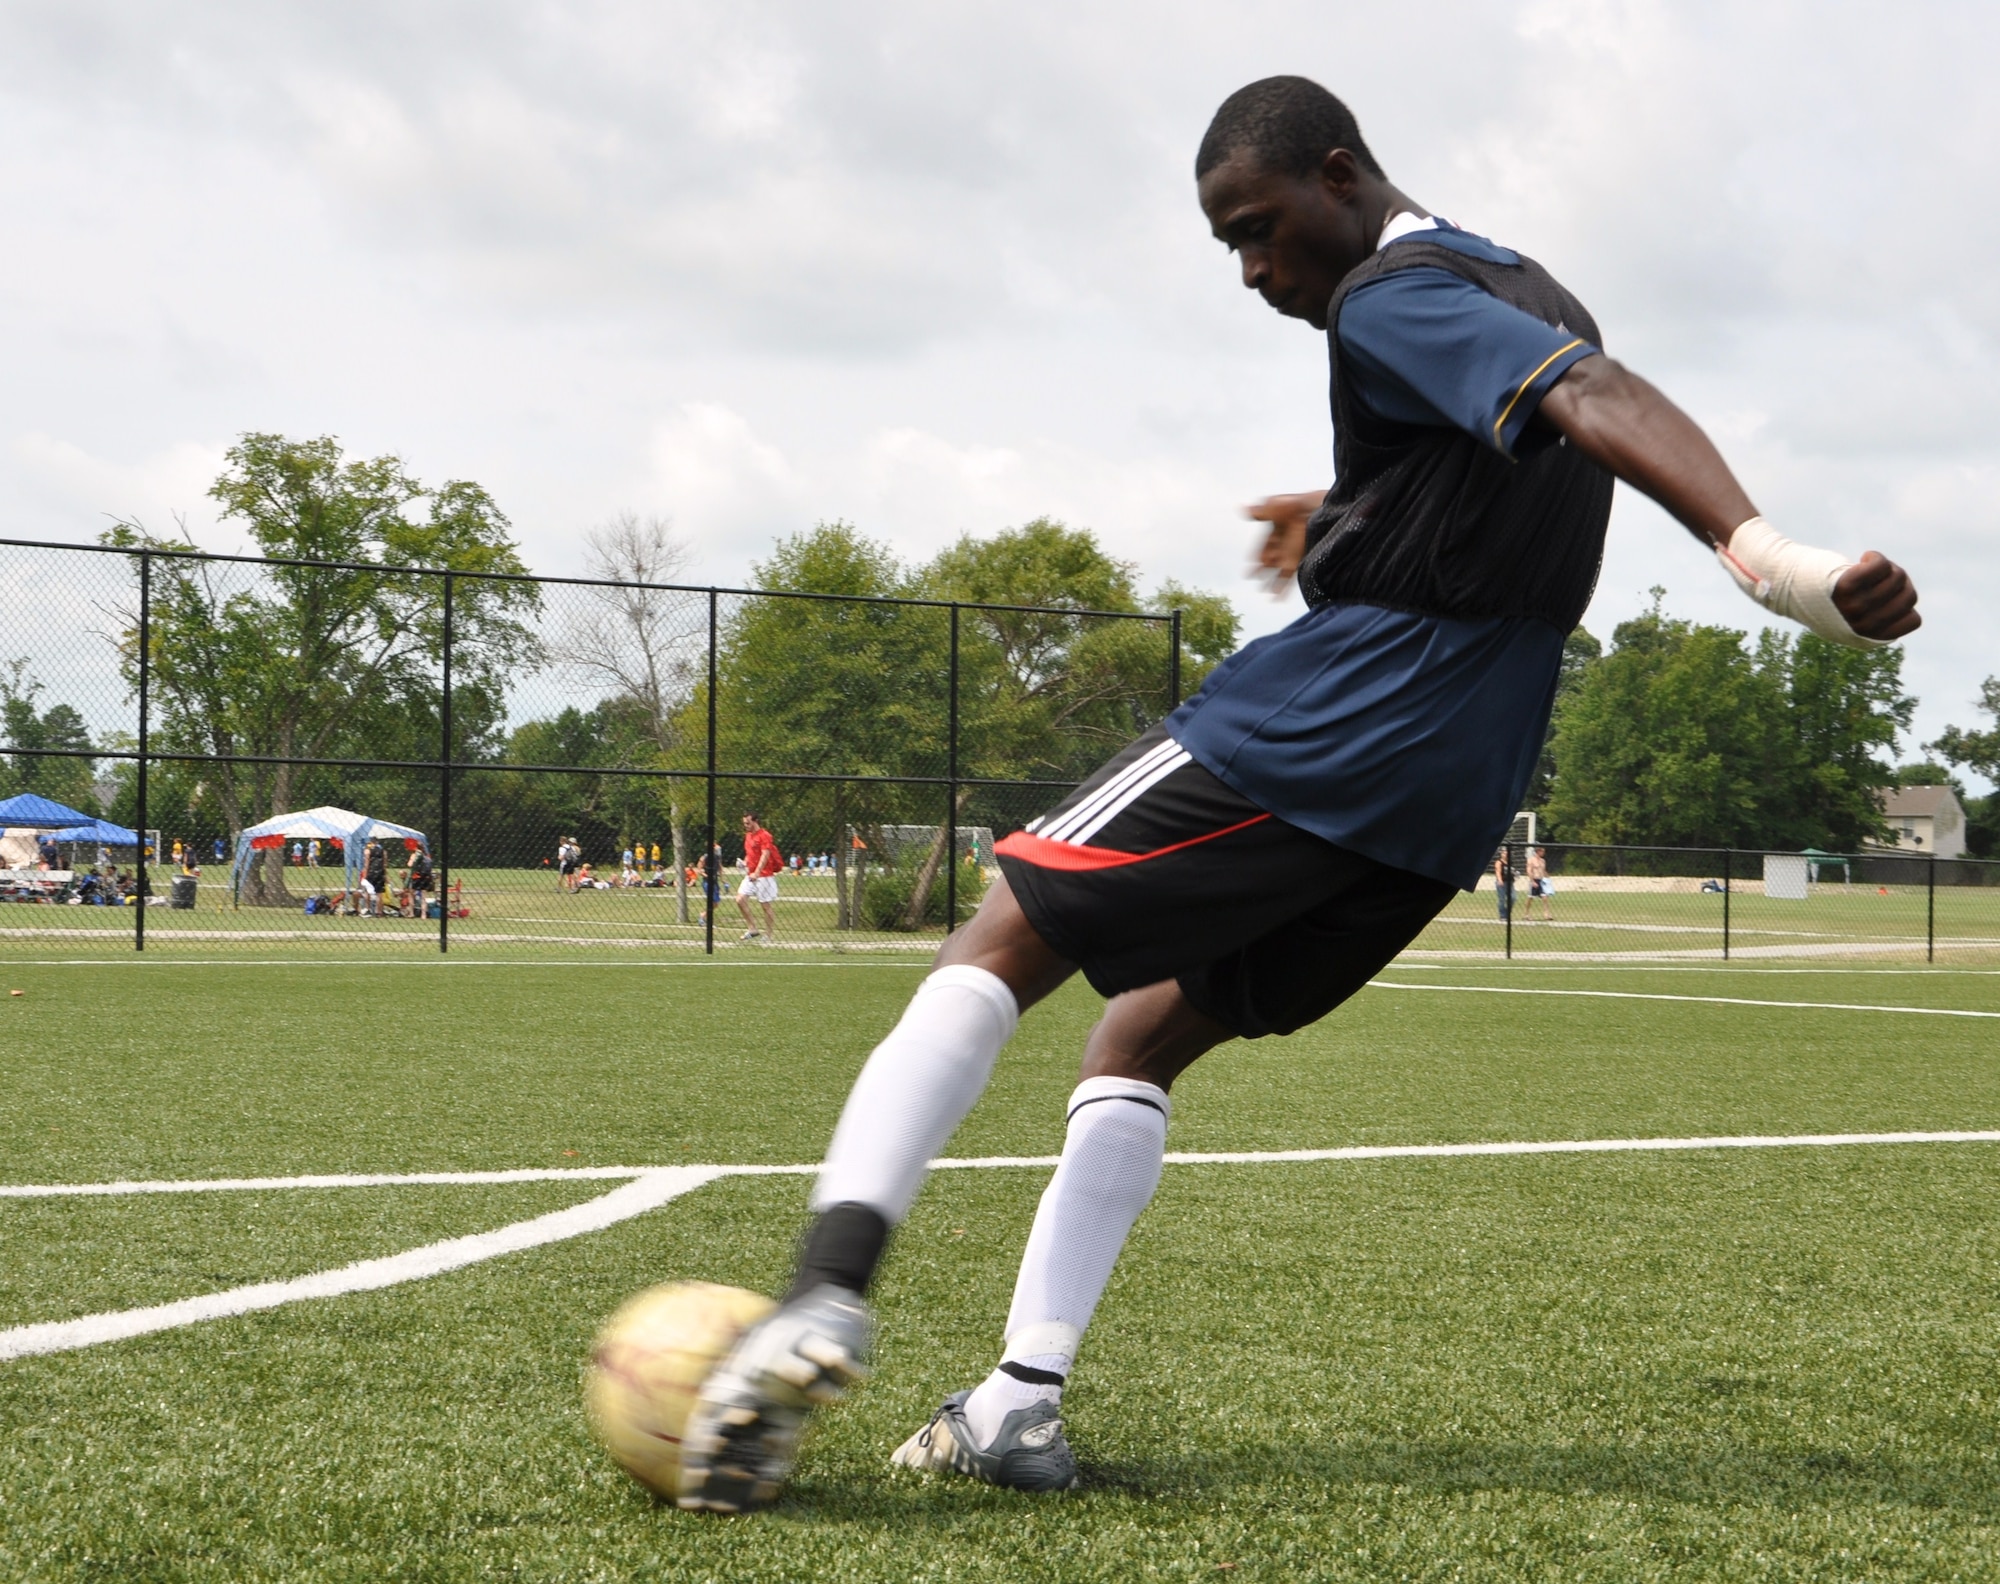 Albert Otoo-Annan, a Langley Raptors midfielder, shoots the ball during practice at the Hampton Roads Soccer Complex in Virginia Beach, Va., Aug. 6, 2011. The Raptors will travel to Joint Base San Antonio, Texas, over the Labor Day weekend to participate in the annual Defender’s Cup, a national military invitational soccer tournament. Otoo-Annan is an Airman 1st class assigned to the 633rd Inpatient Squadron at Langley Air Force Base. (U.S. Air Force photo by Senior Airman Jason J. Brown/Released)